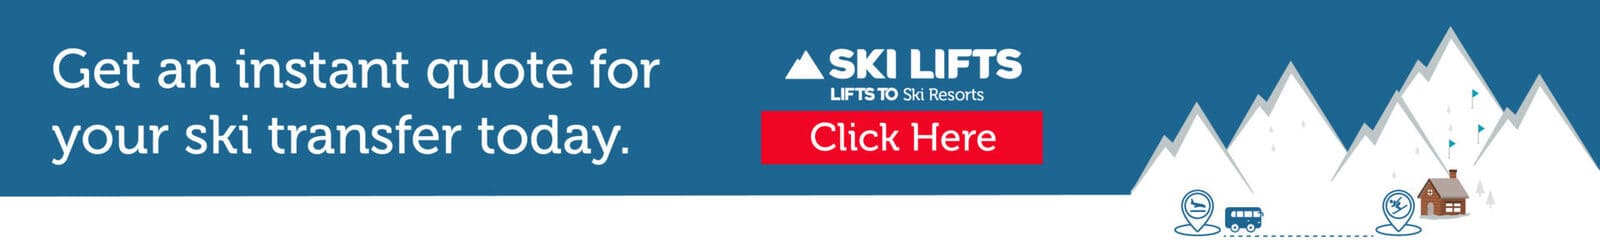 Get an instant quote for your ski transfer today